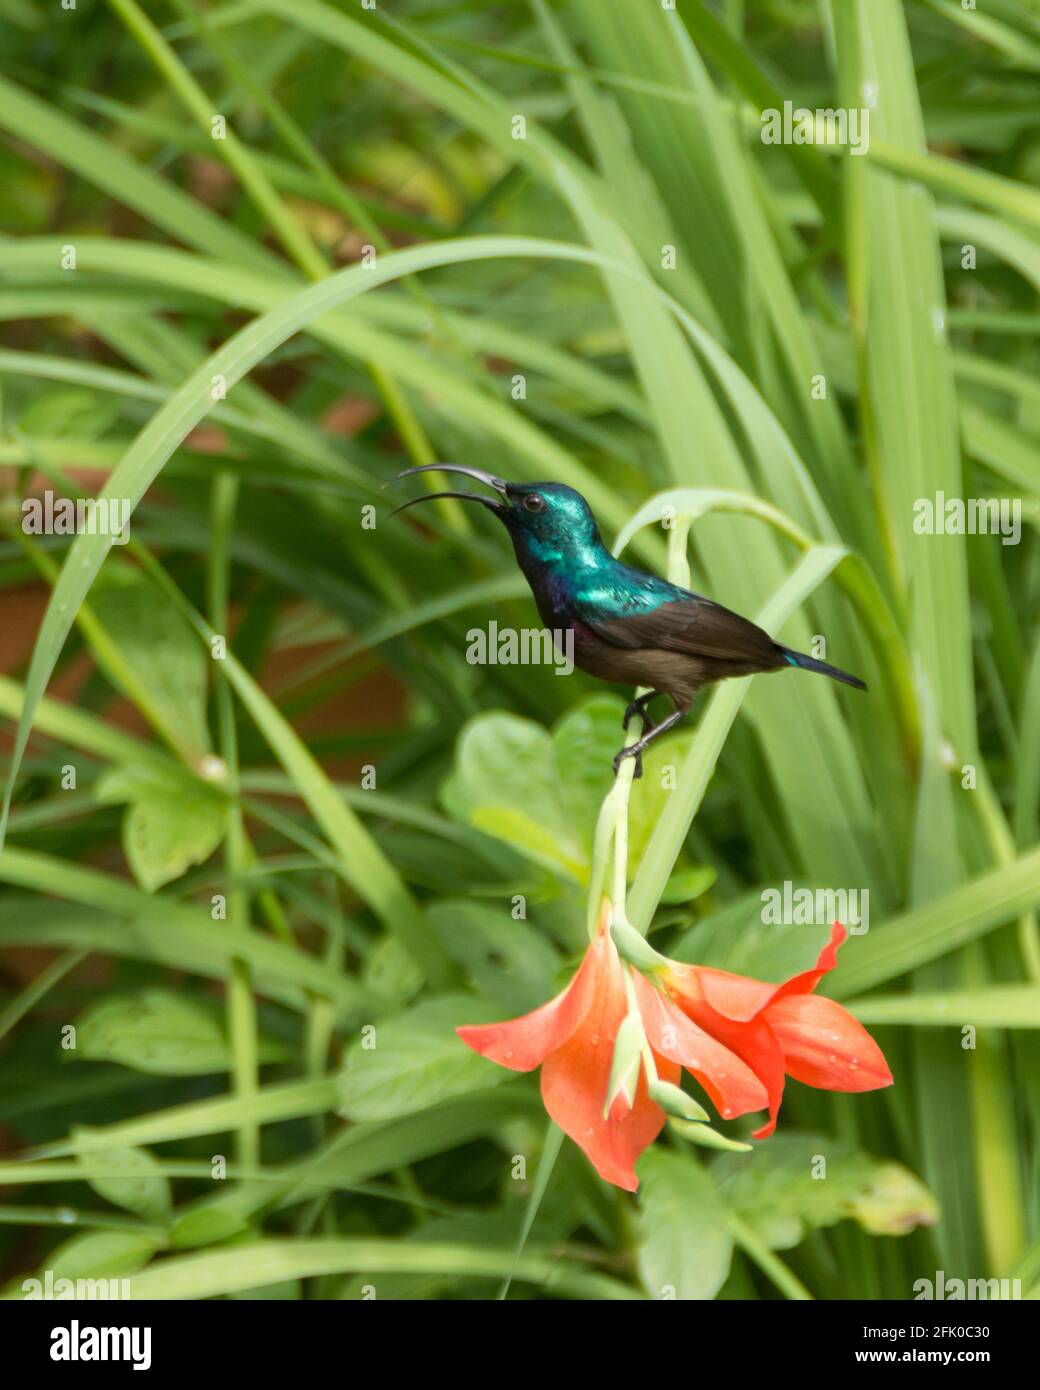 Male Loten's sunbird (Cinnyris lotenius), also known as the long-billed sunbird or maroon-breasted sunbird, is a sunbird endemic to peninsular India a Stock Photo